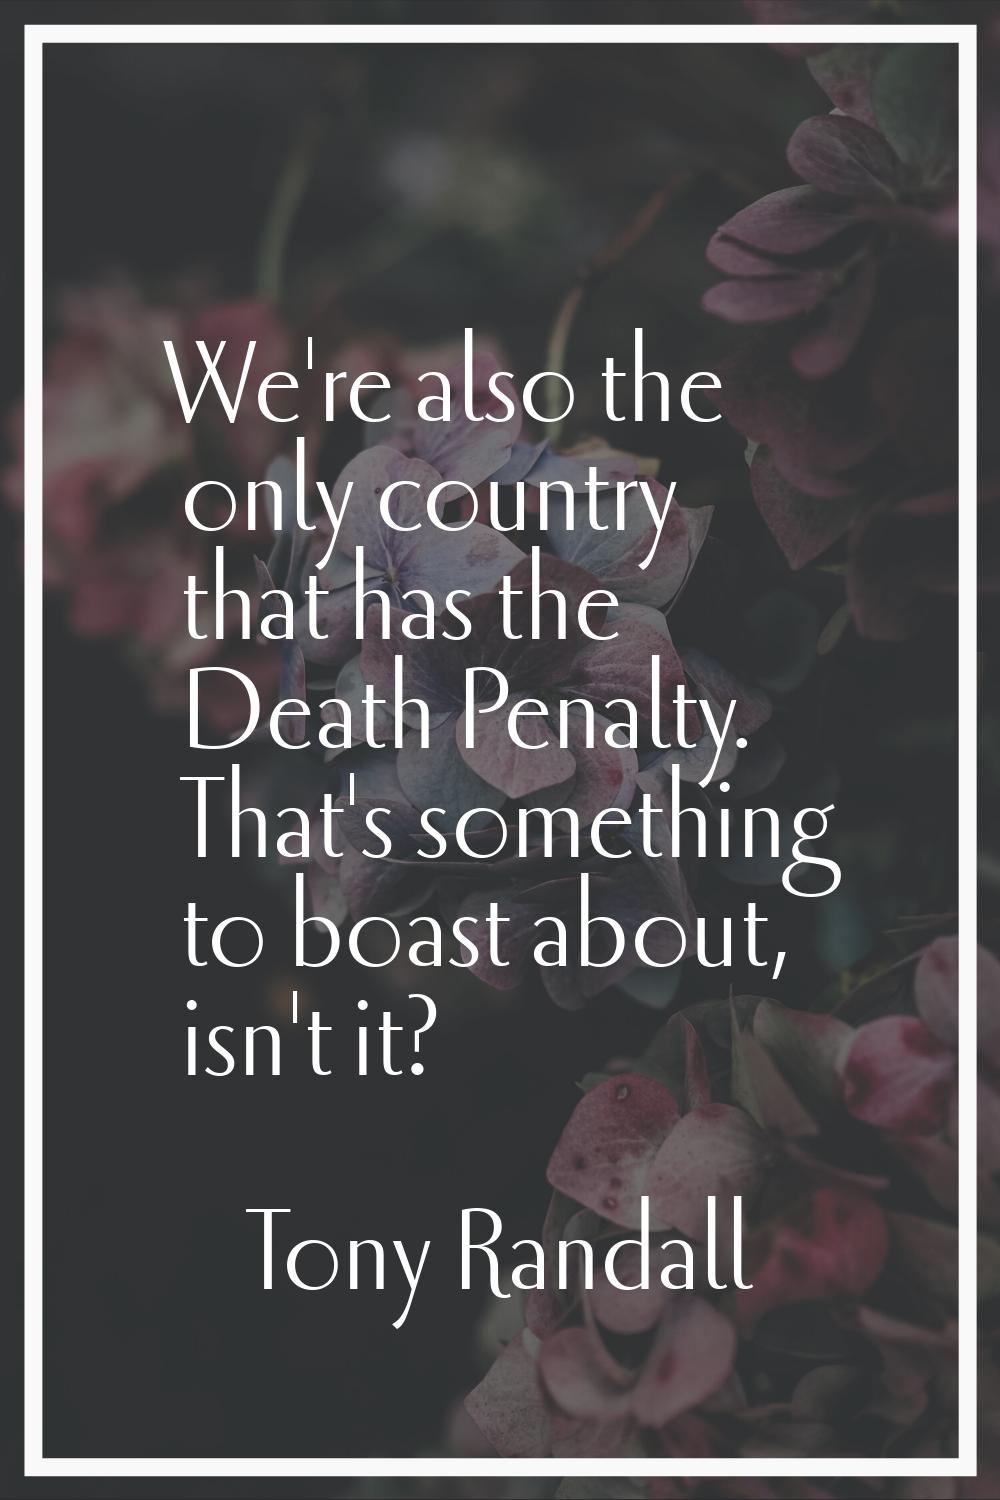 We're also the only country that has the Death Penalty. That's something to boast about, isn't it?